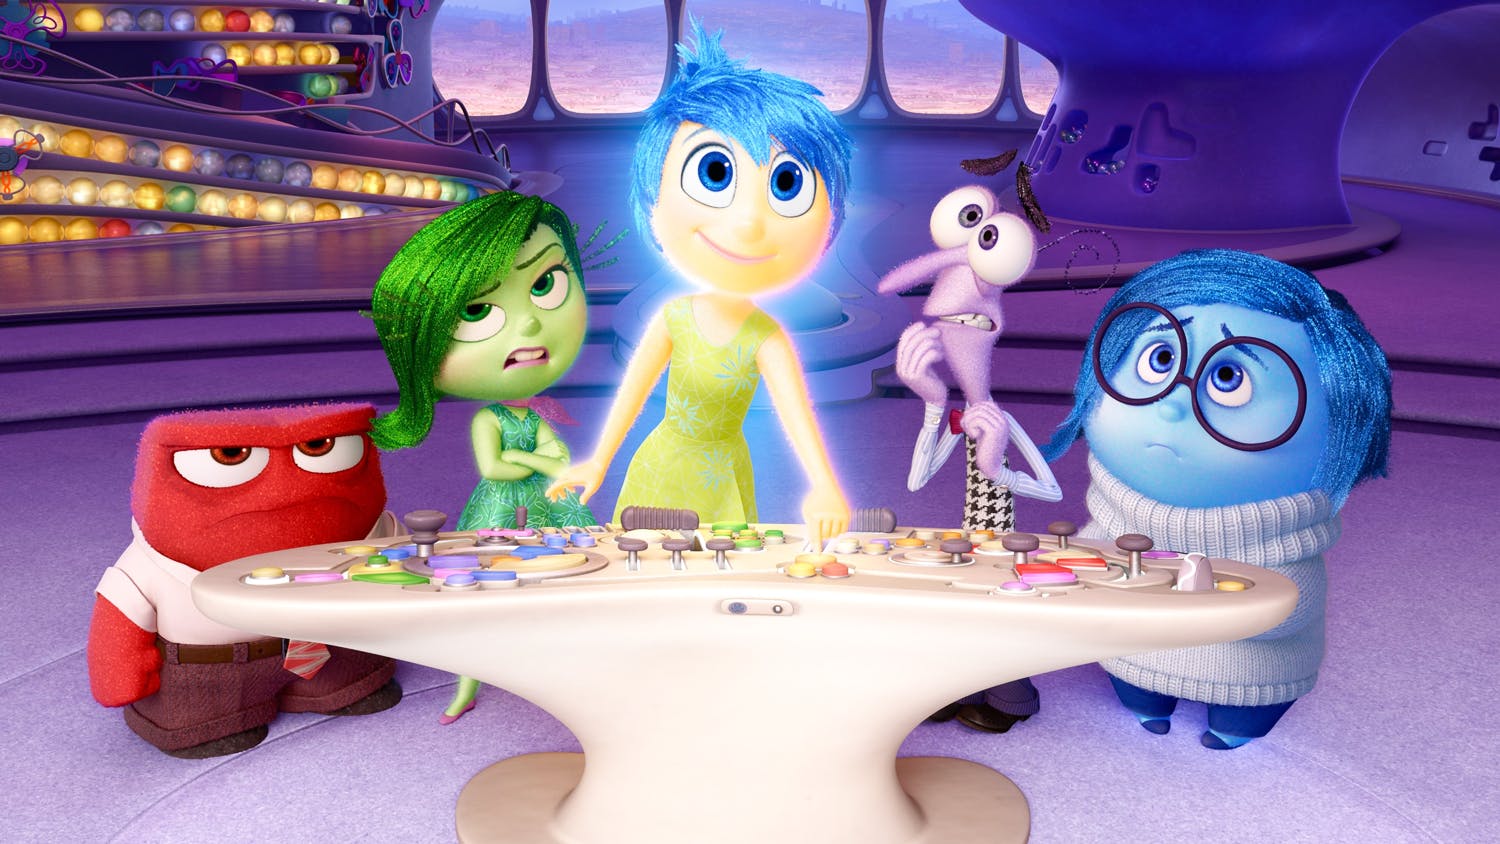 The 50 Best Animated Movies Movies Empire pic